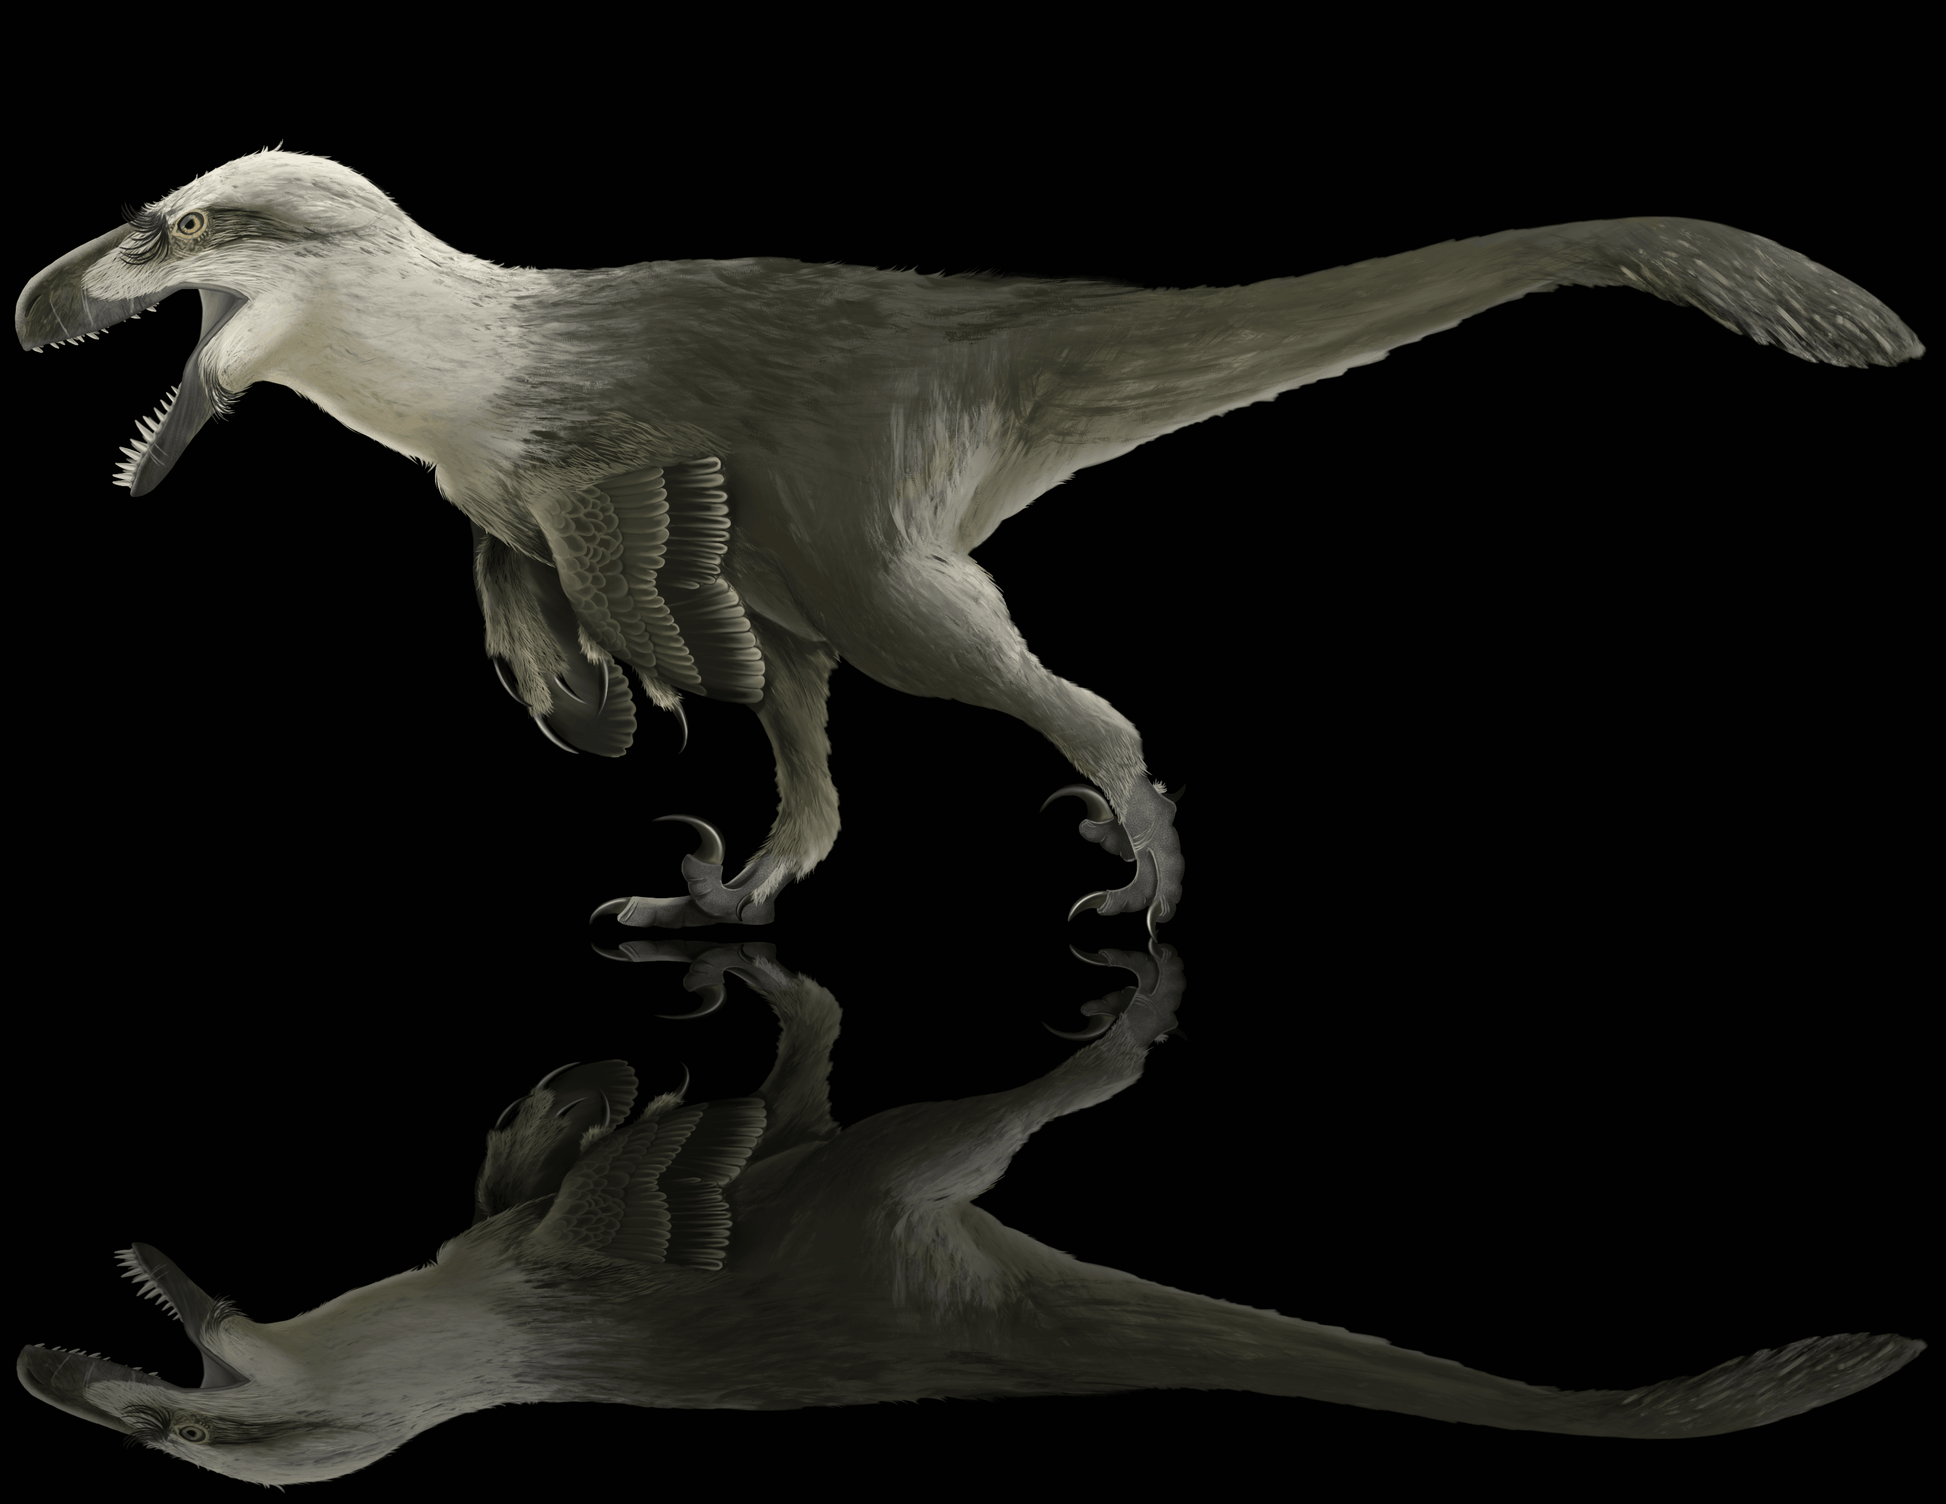 Utahraptor exclusive paleoart that comes with the Utahraptor hand claw cast